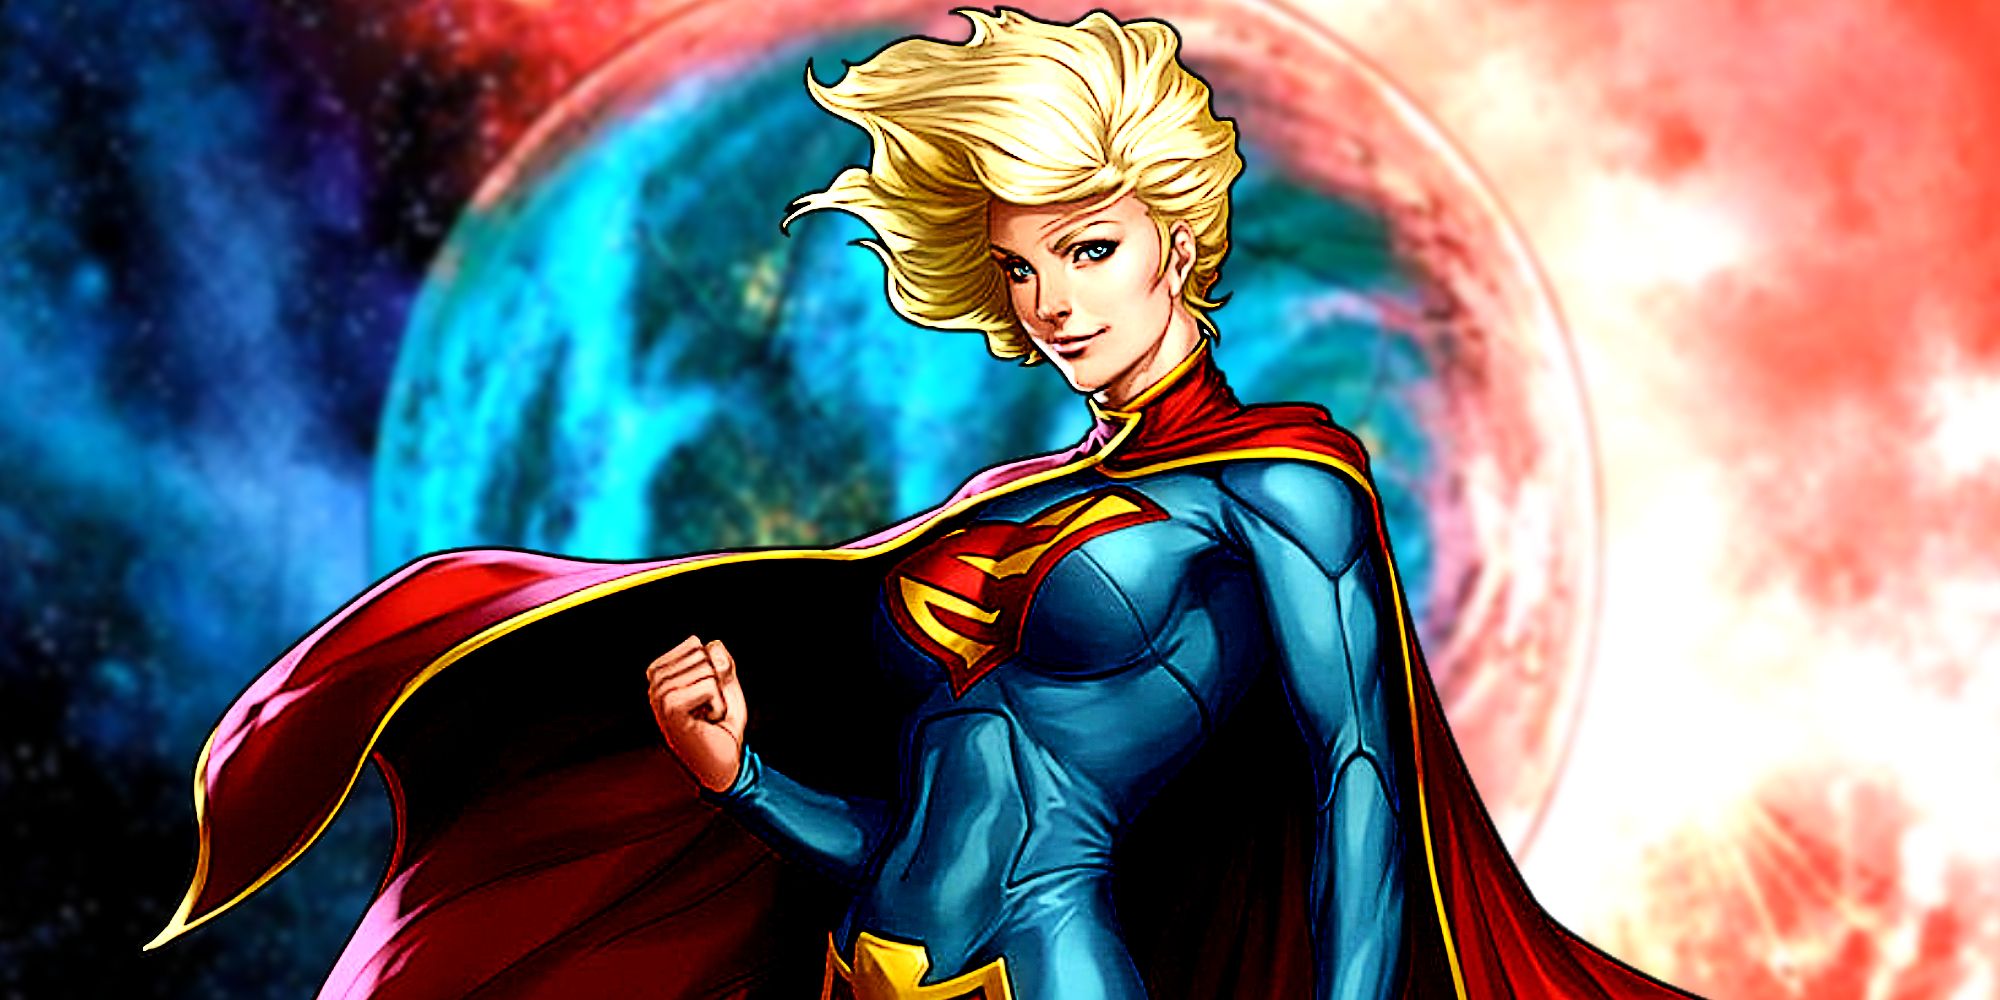 Supergirl and Krypton in DC Comics